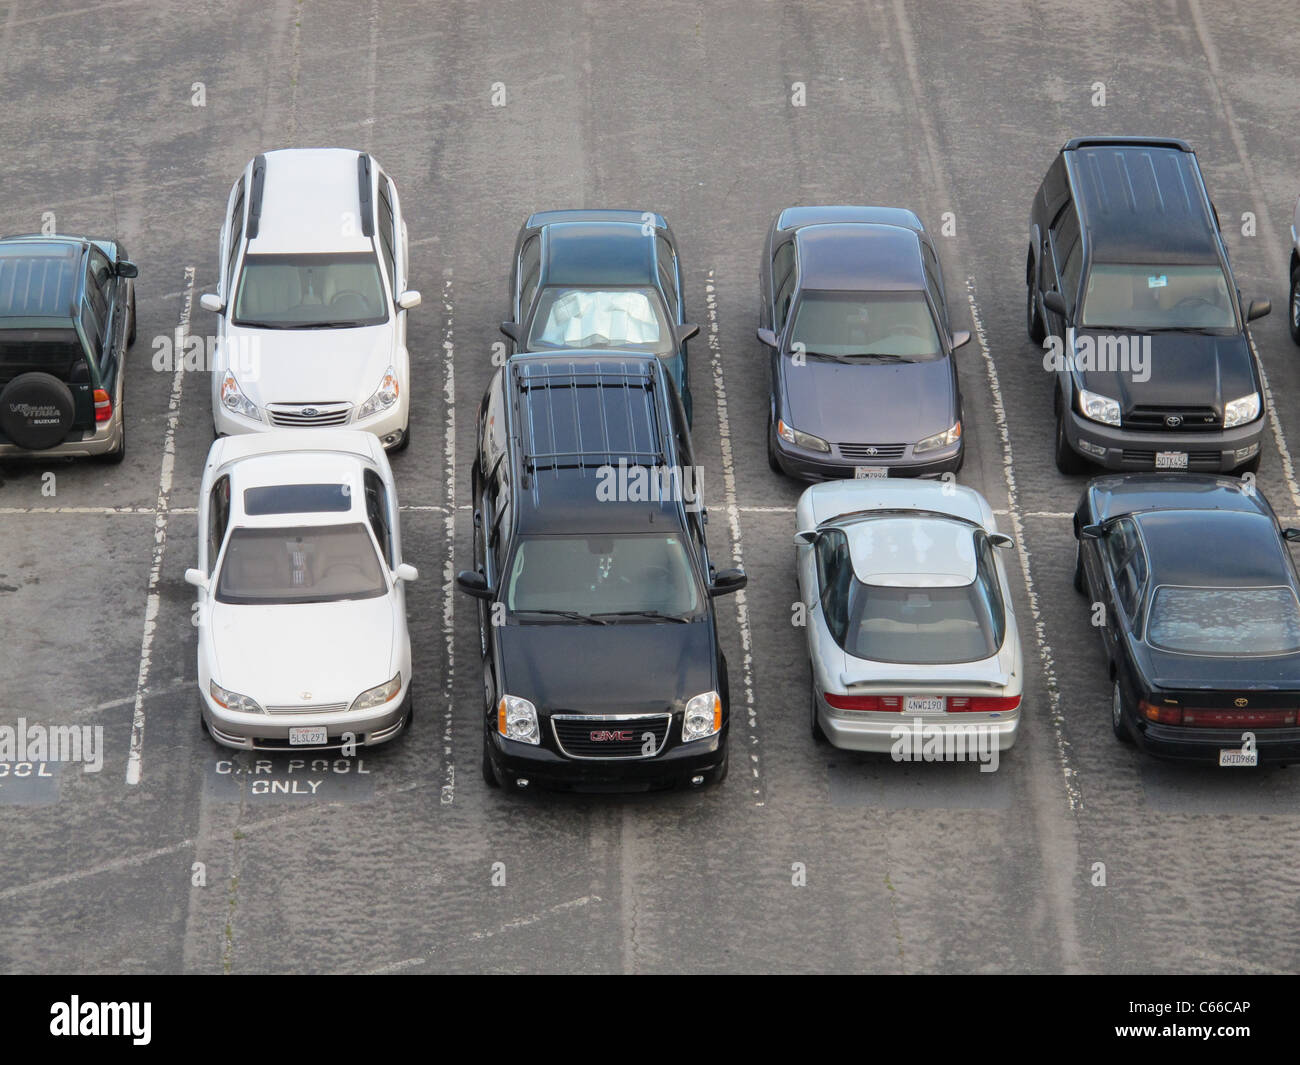 Aerial view of a long term parking lot at SFO airport, San Francisco, California, United States of America Stock Photo